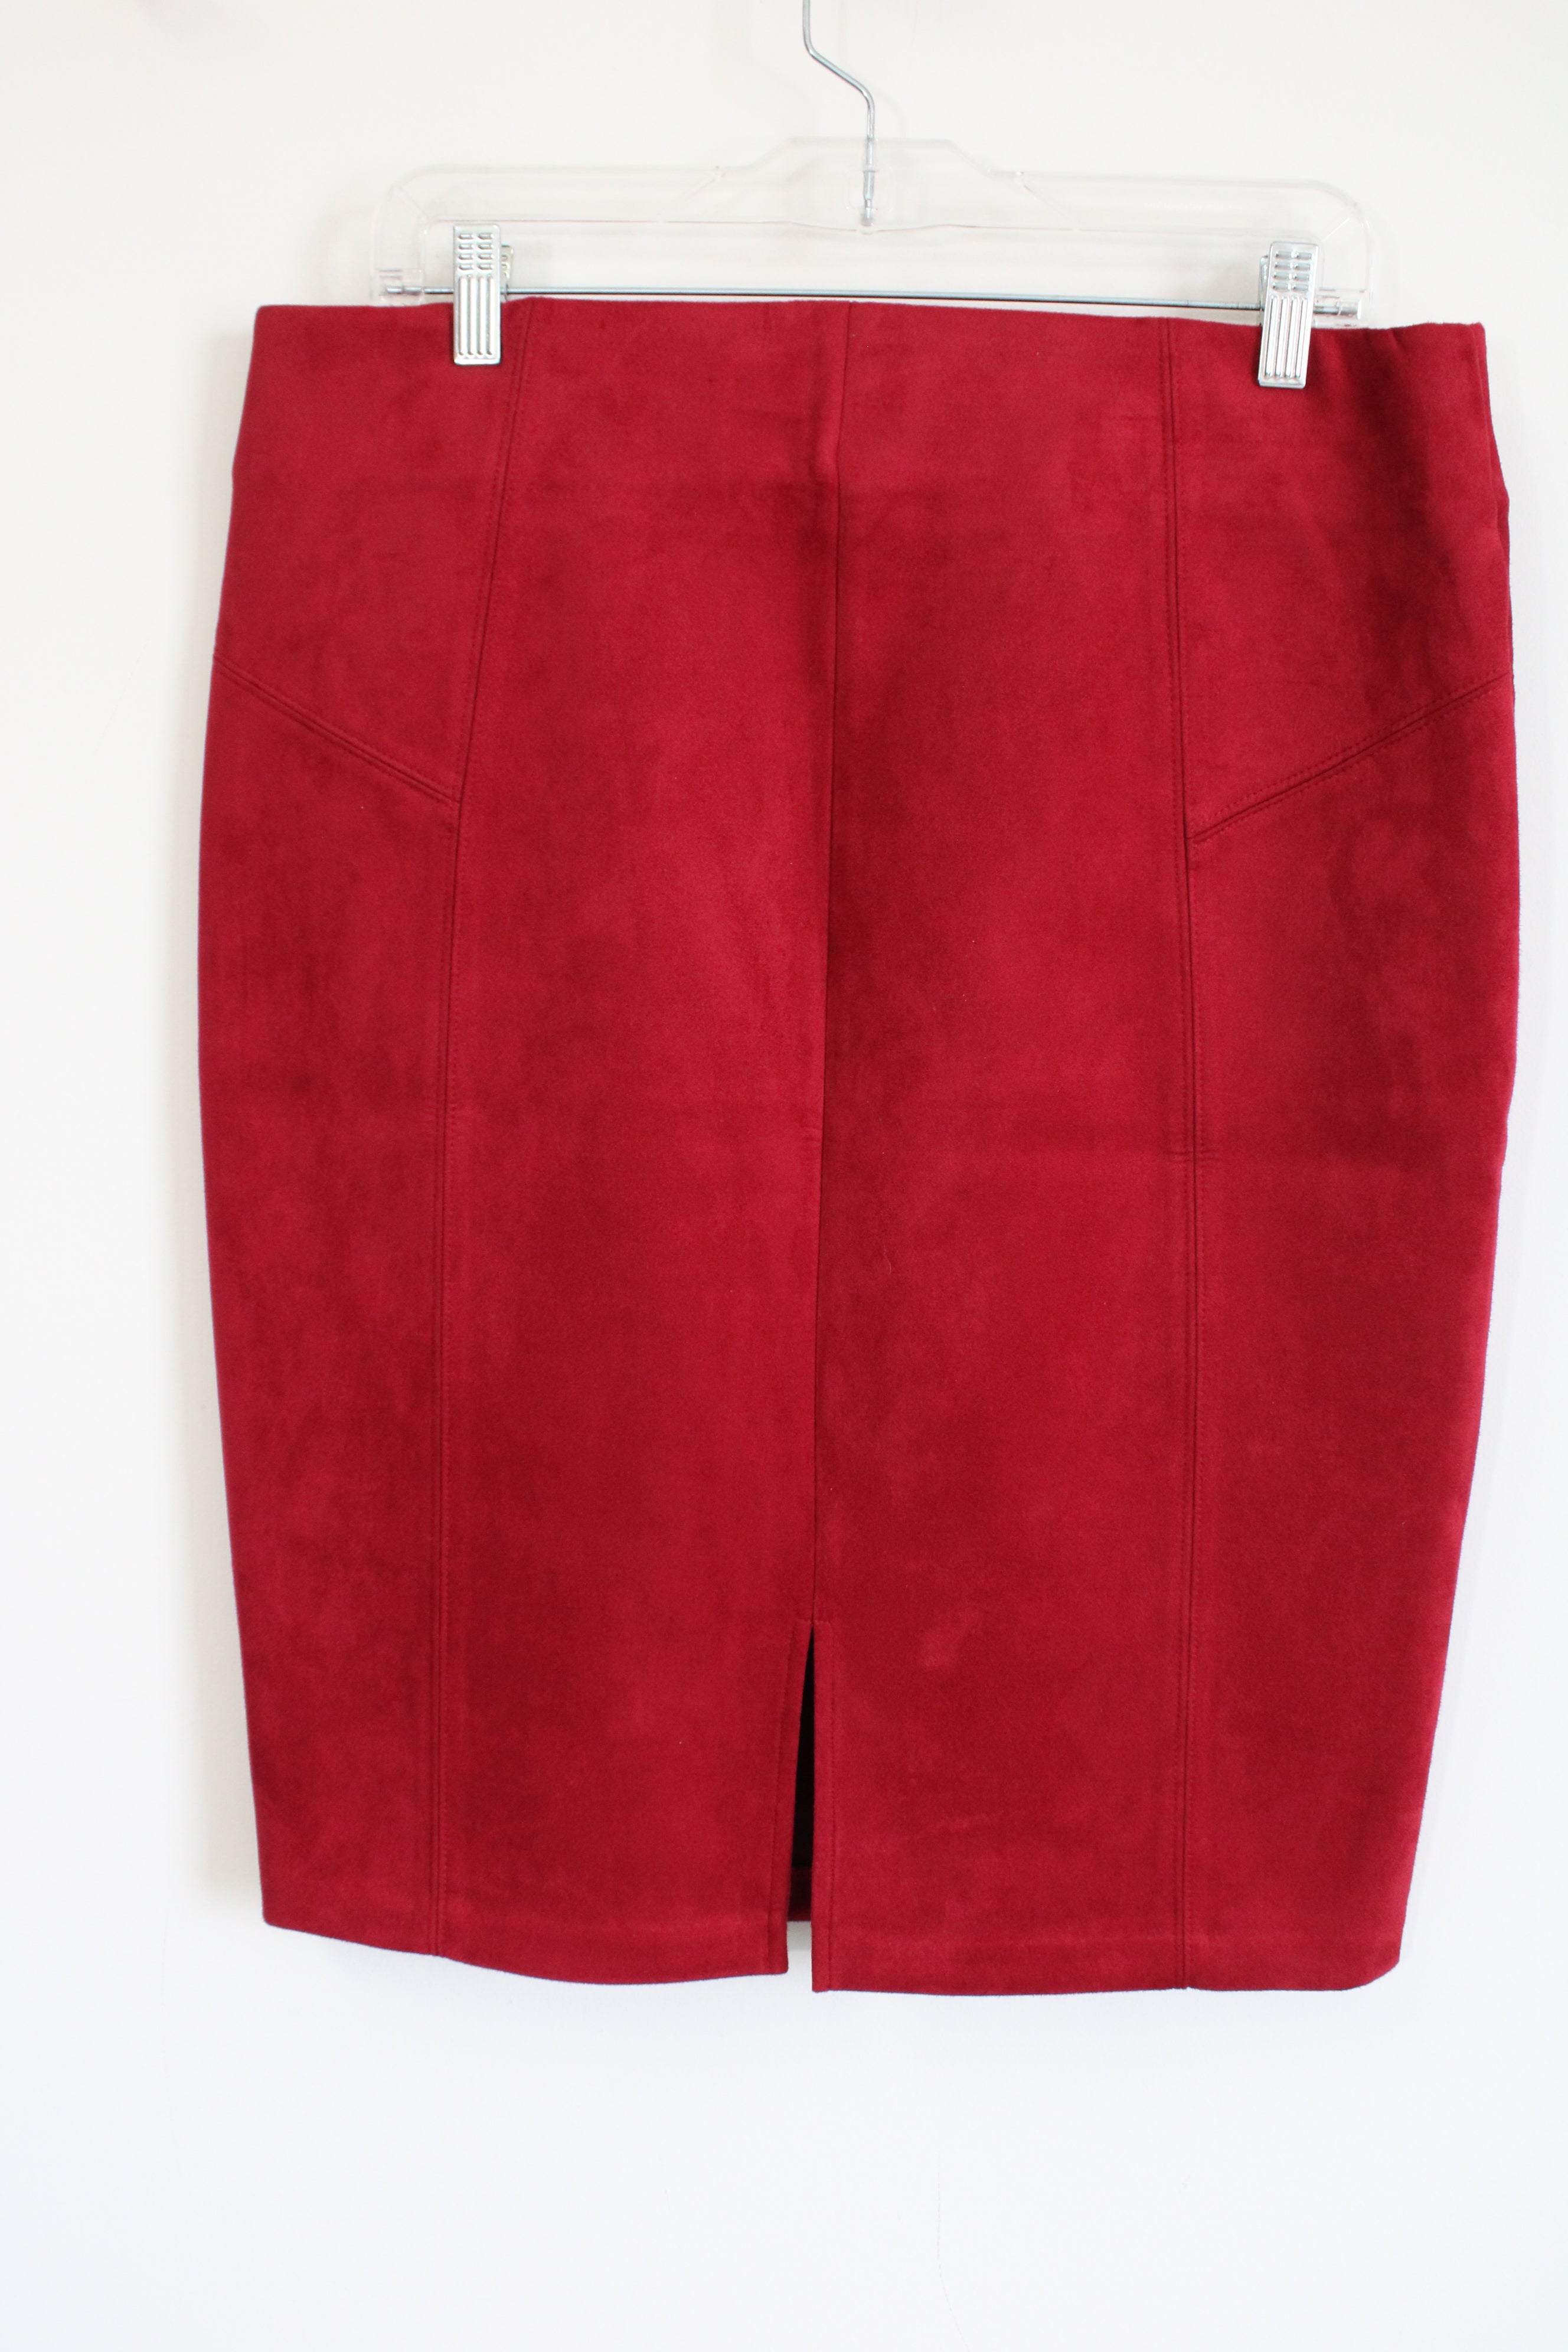 Marc New York Anthony Marc Red Sueded Pencil Skirt | L